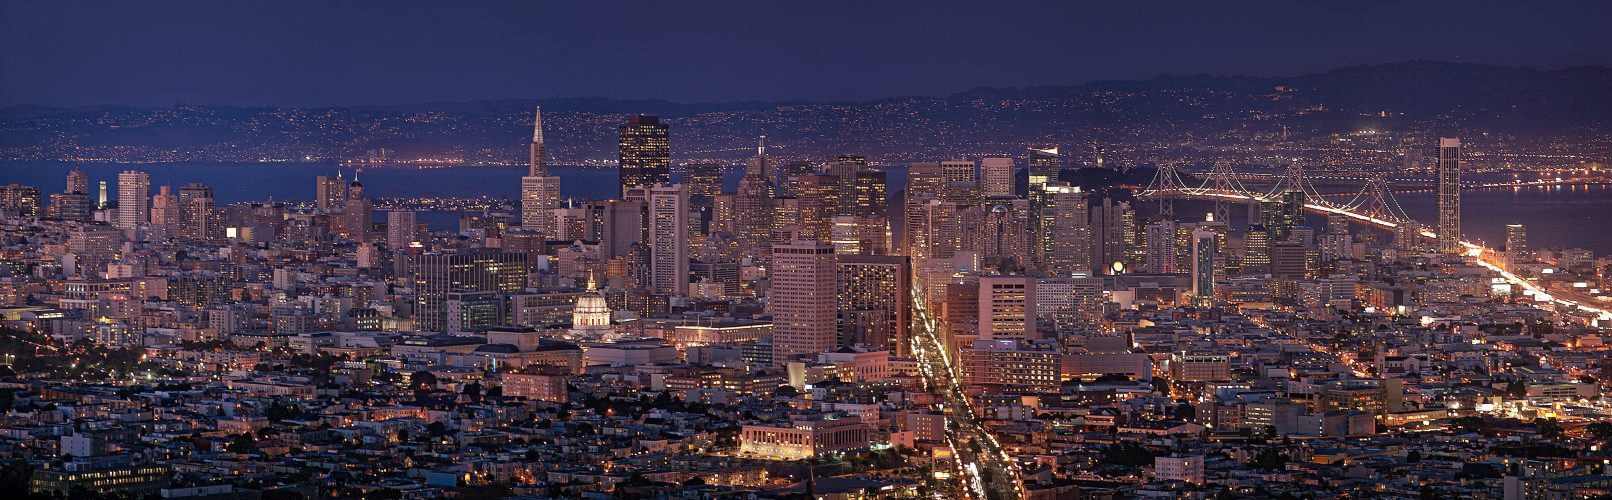 View of San Francisco from Twin Peaks at night